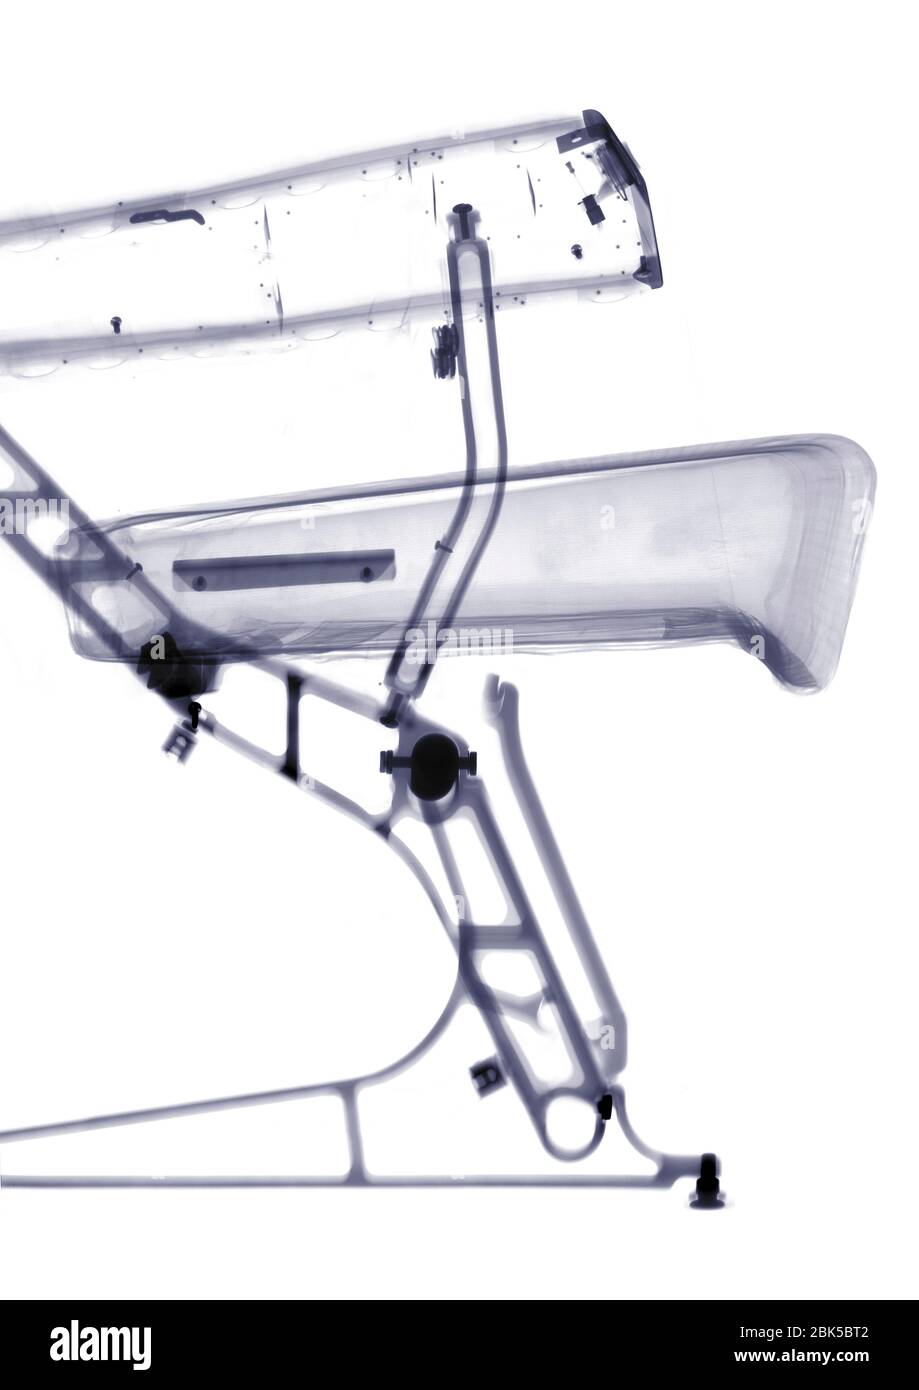 Airplane seat from the side, X-ray. Stock Photo